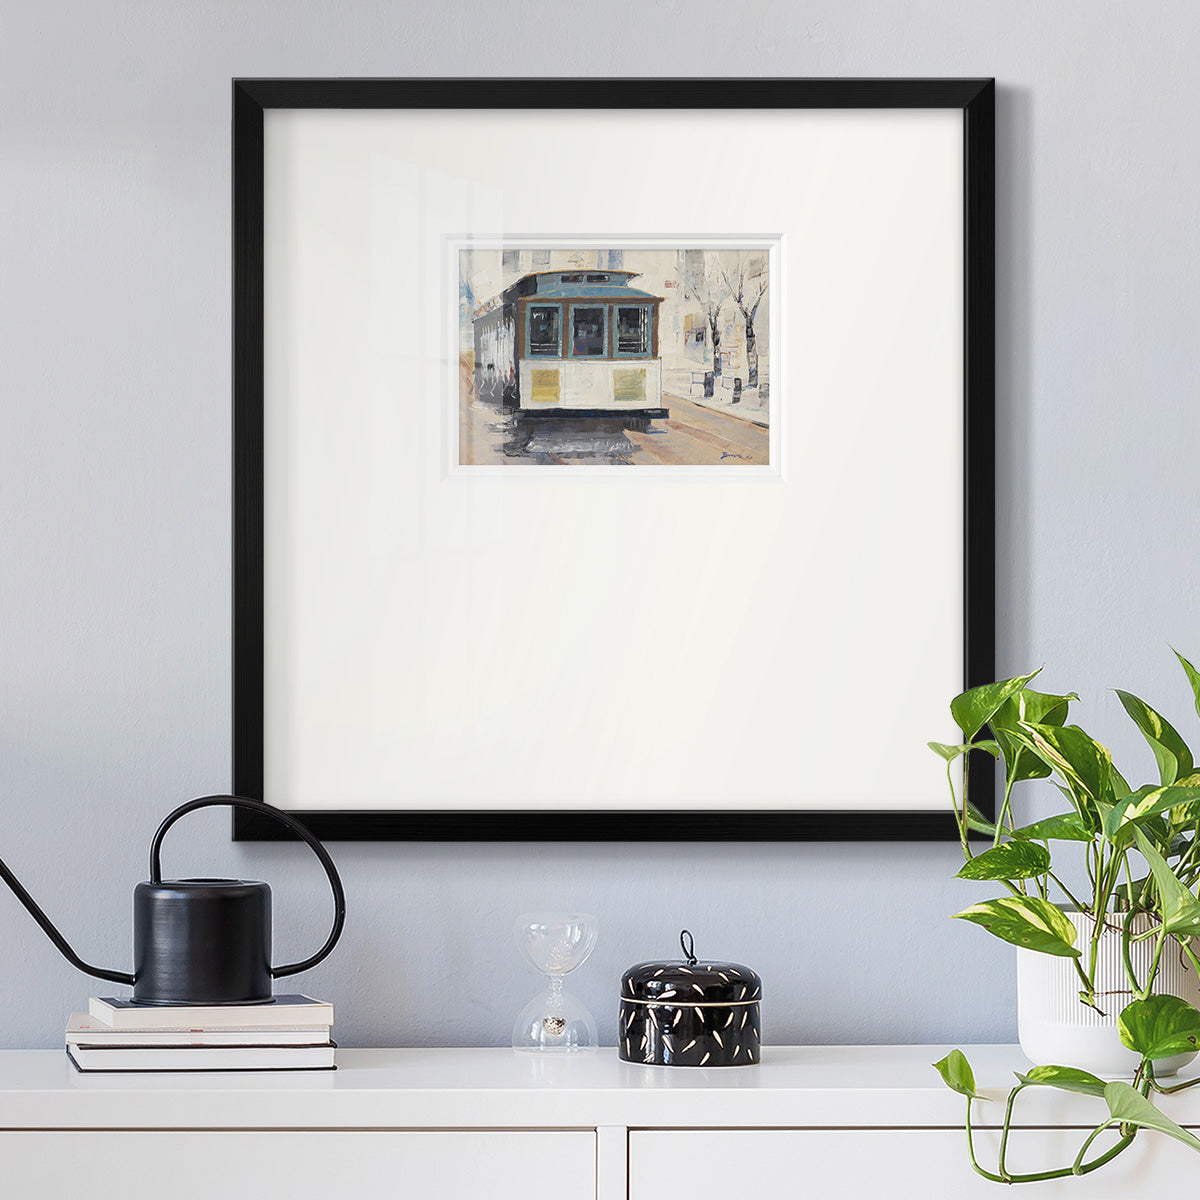 Cable Town Premium Framed Print Double Matboard